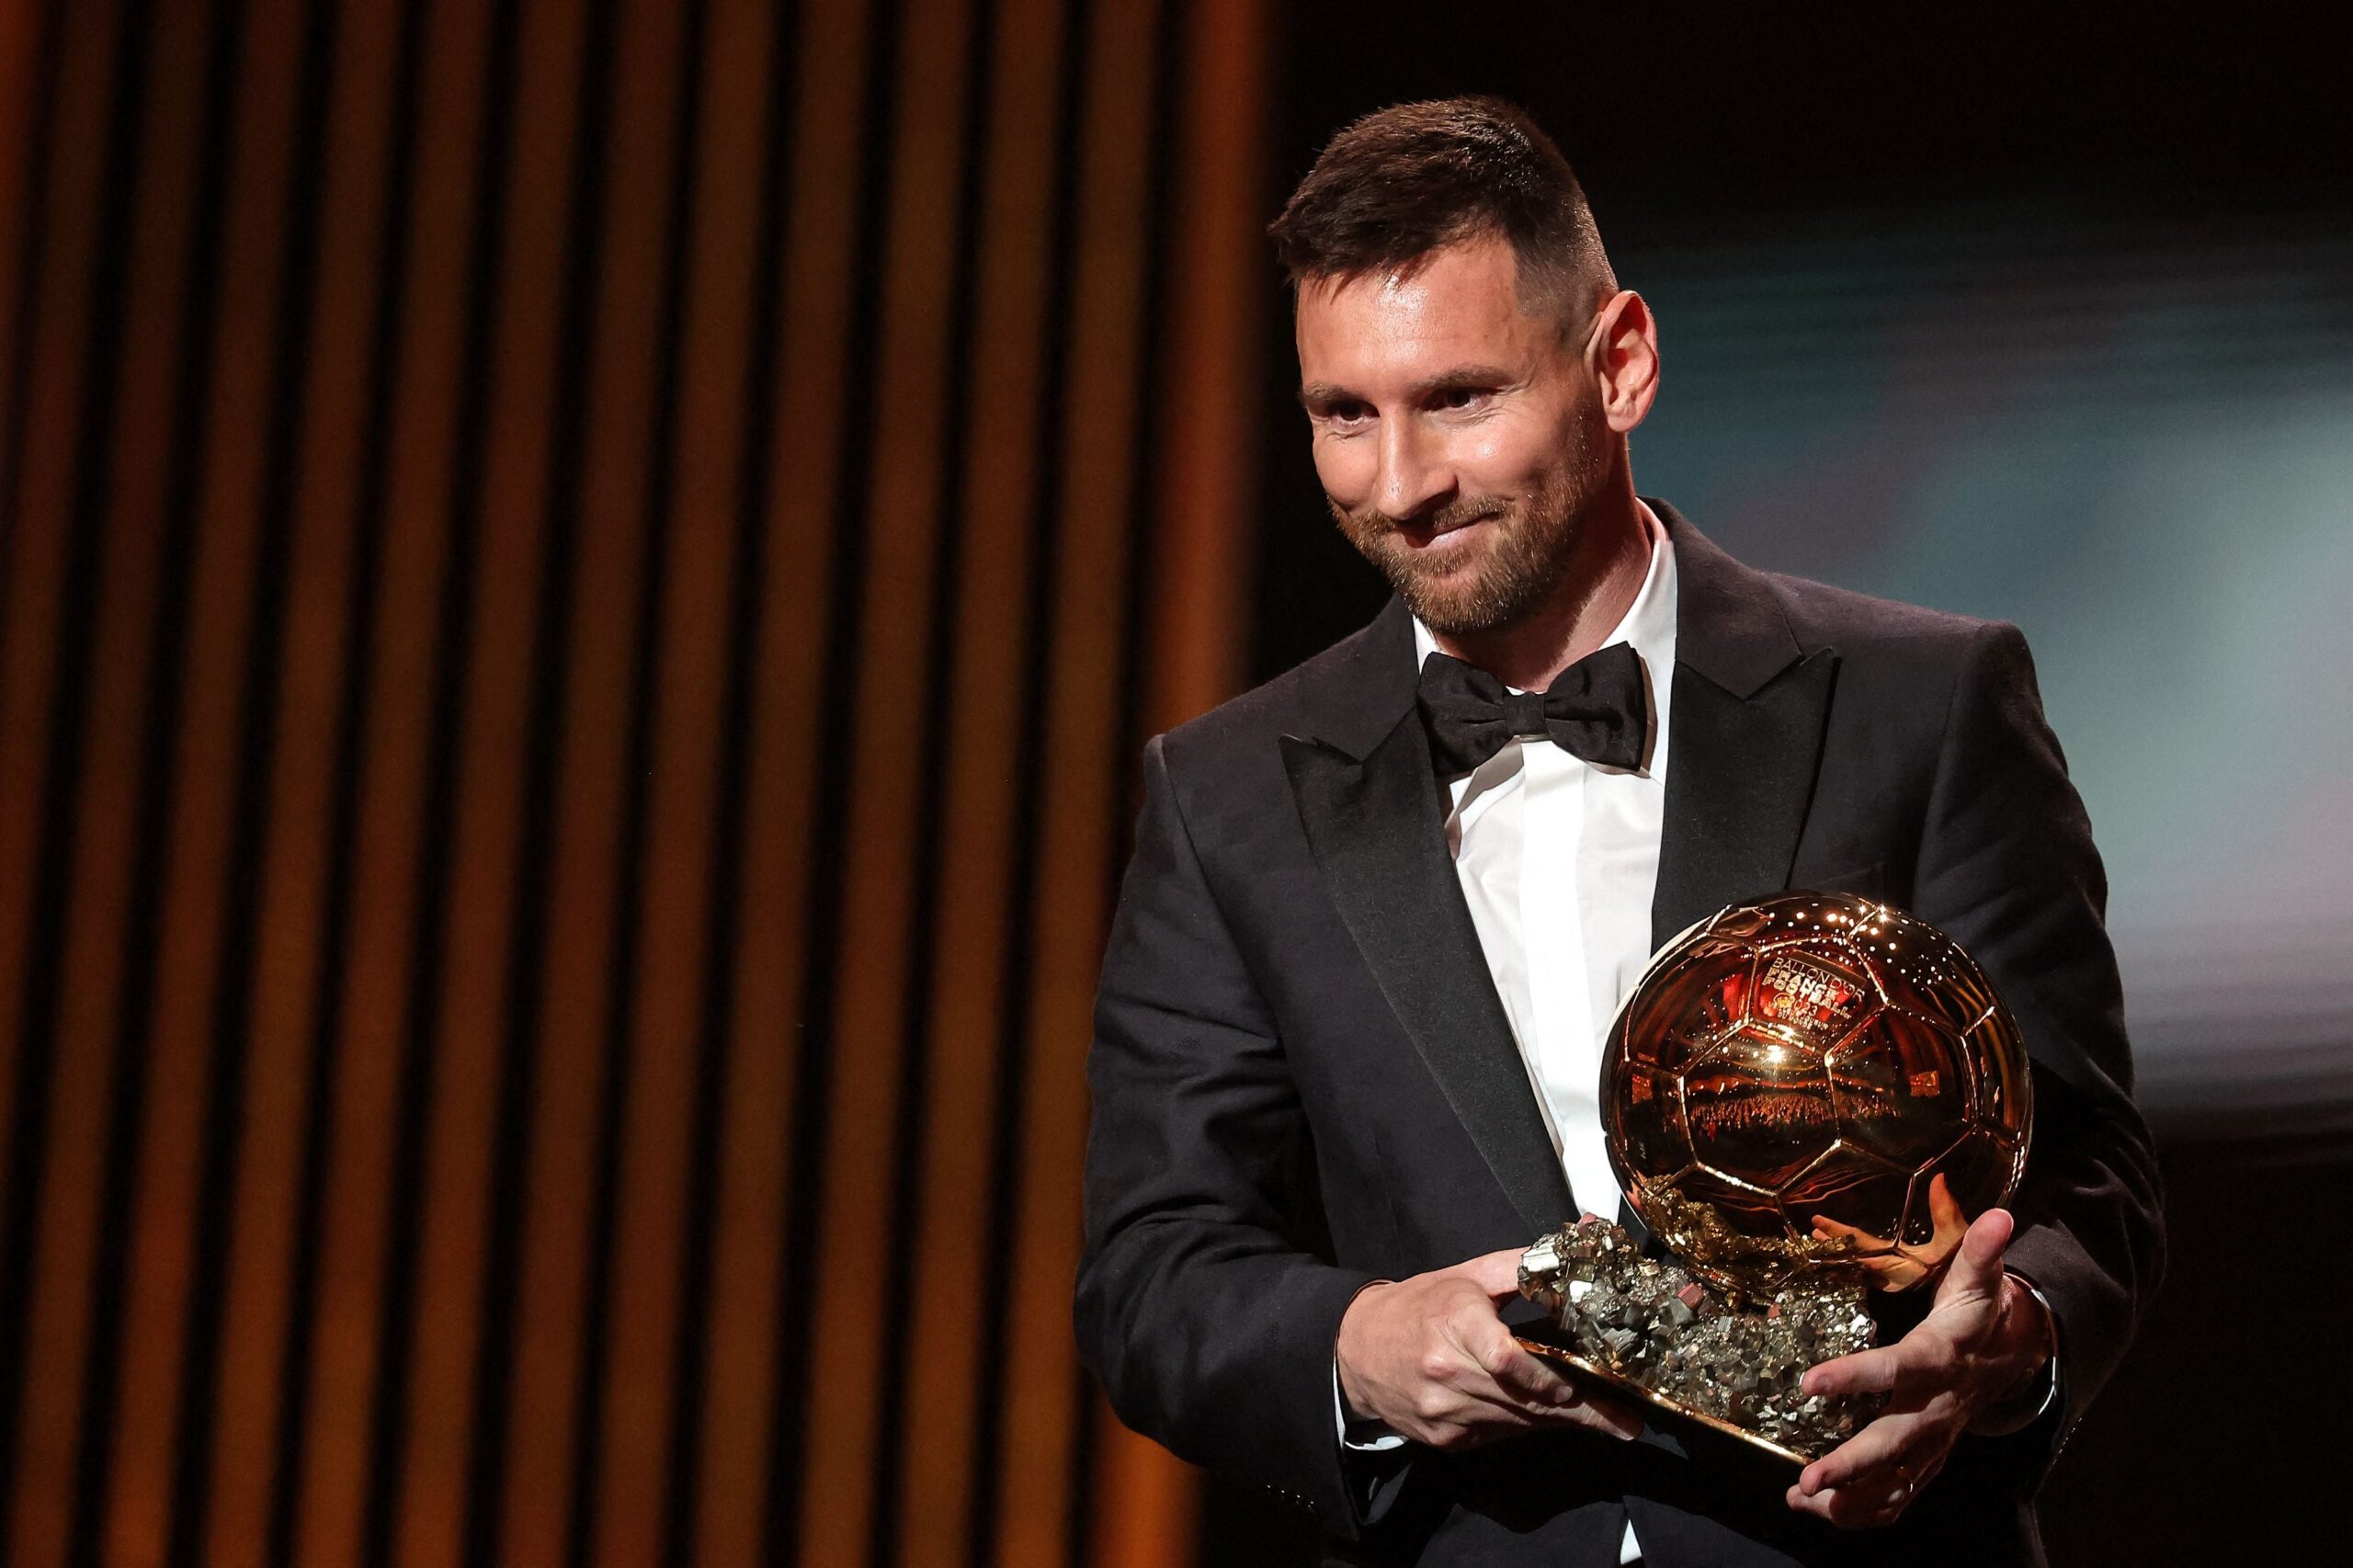 Updates for the Ballon d'Or Awards: Messi and Bonmati announced as winners.